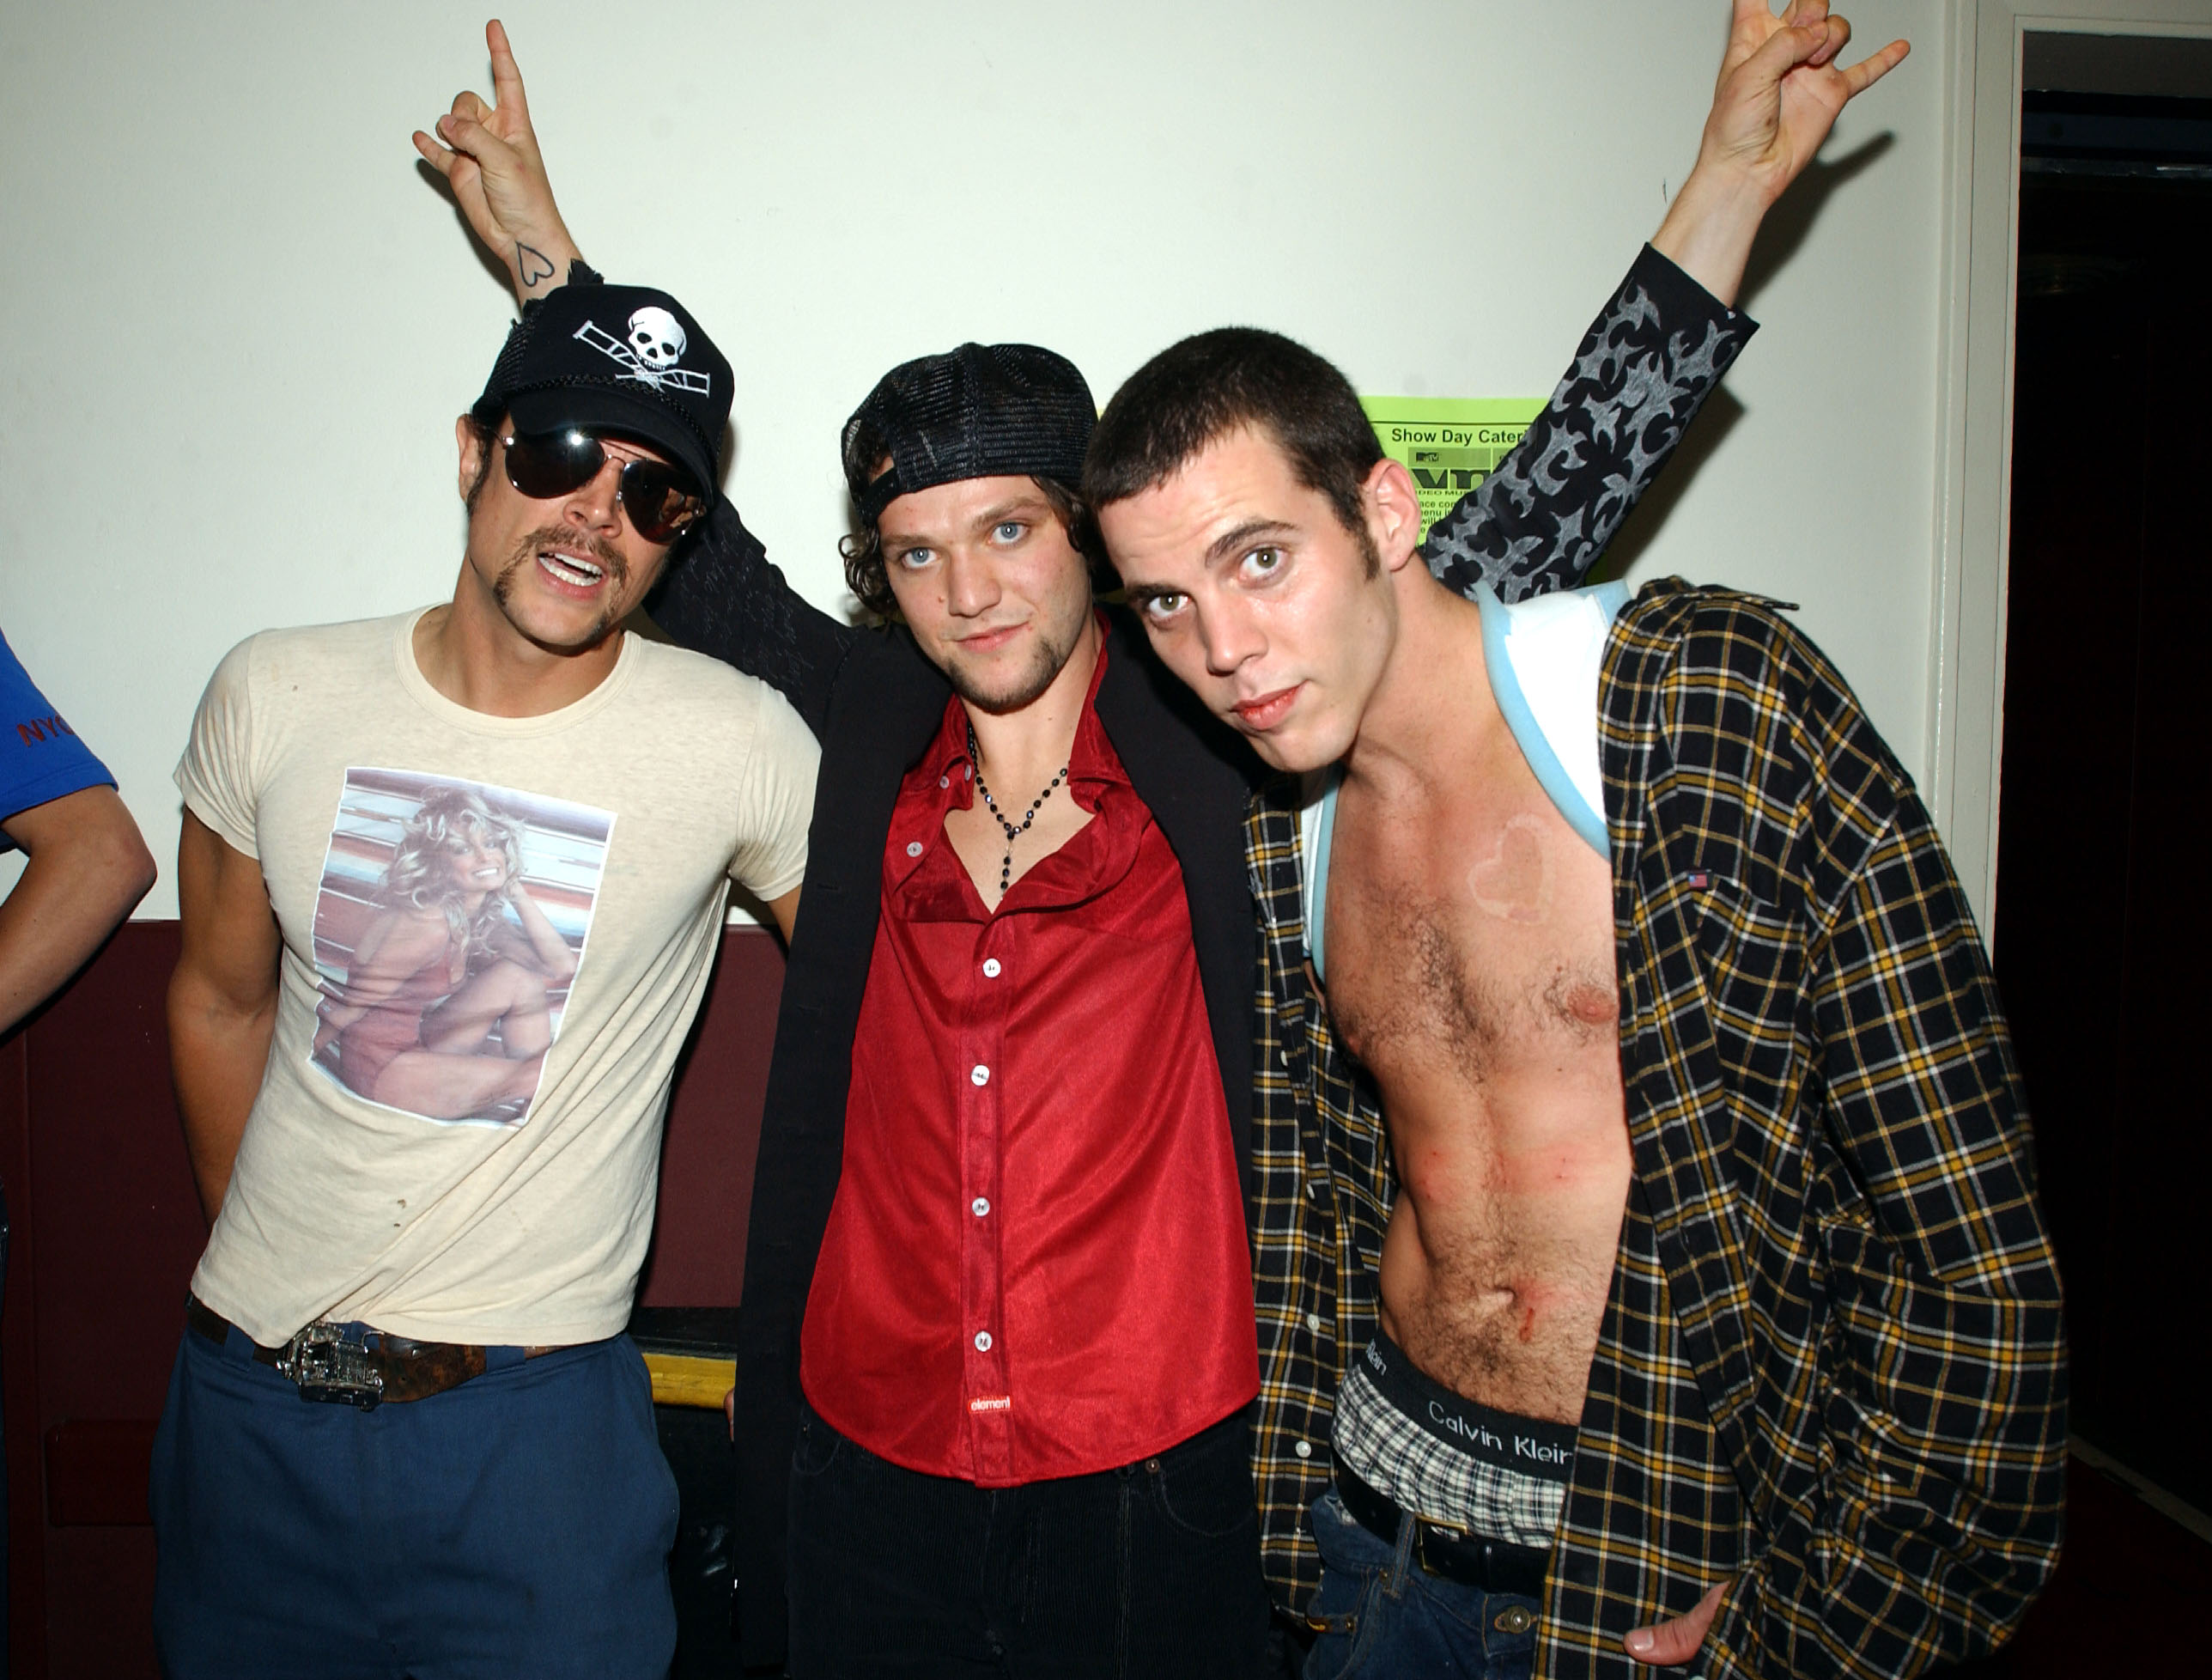 Johnny Knoxville, Bam Margera, and Steve-O